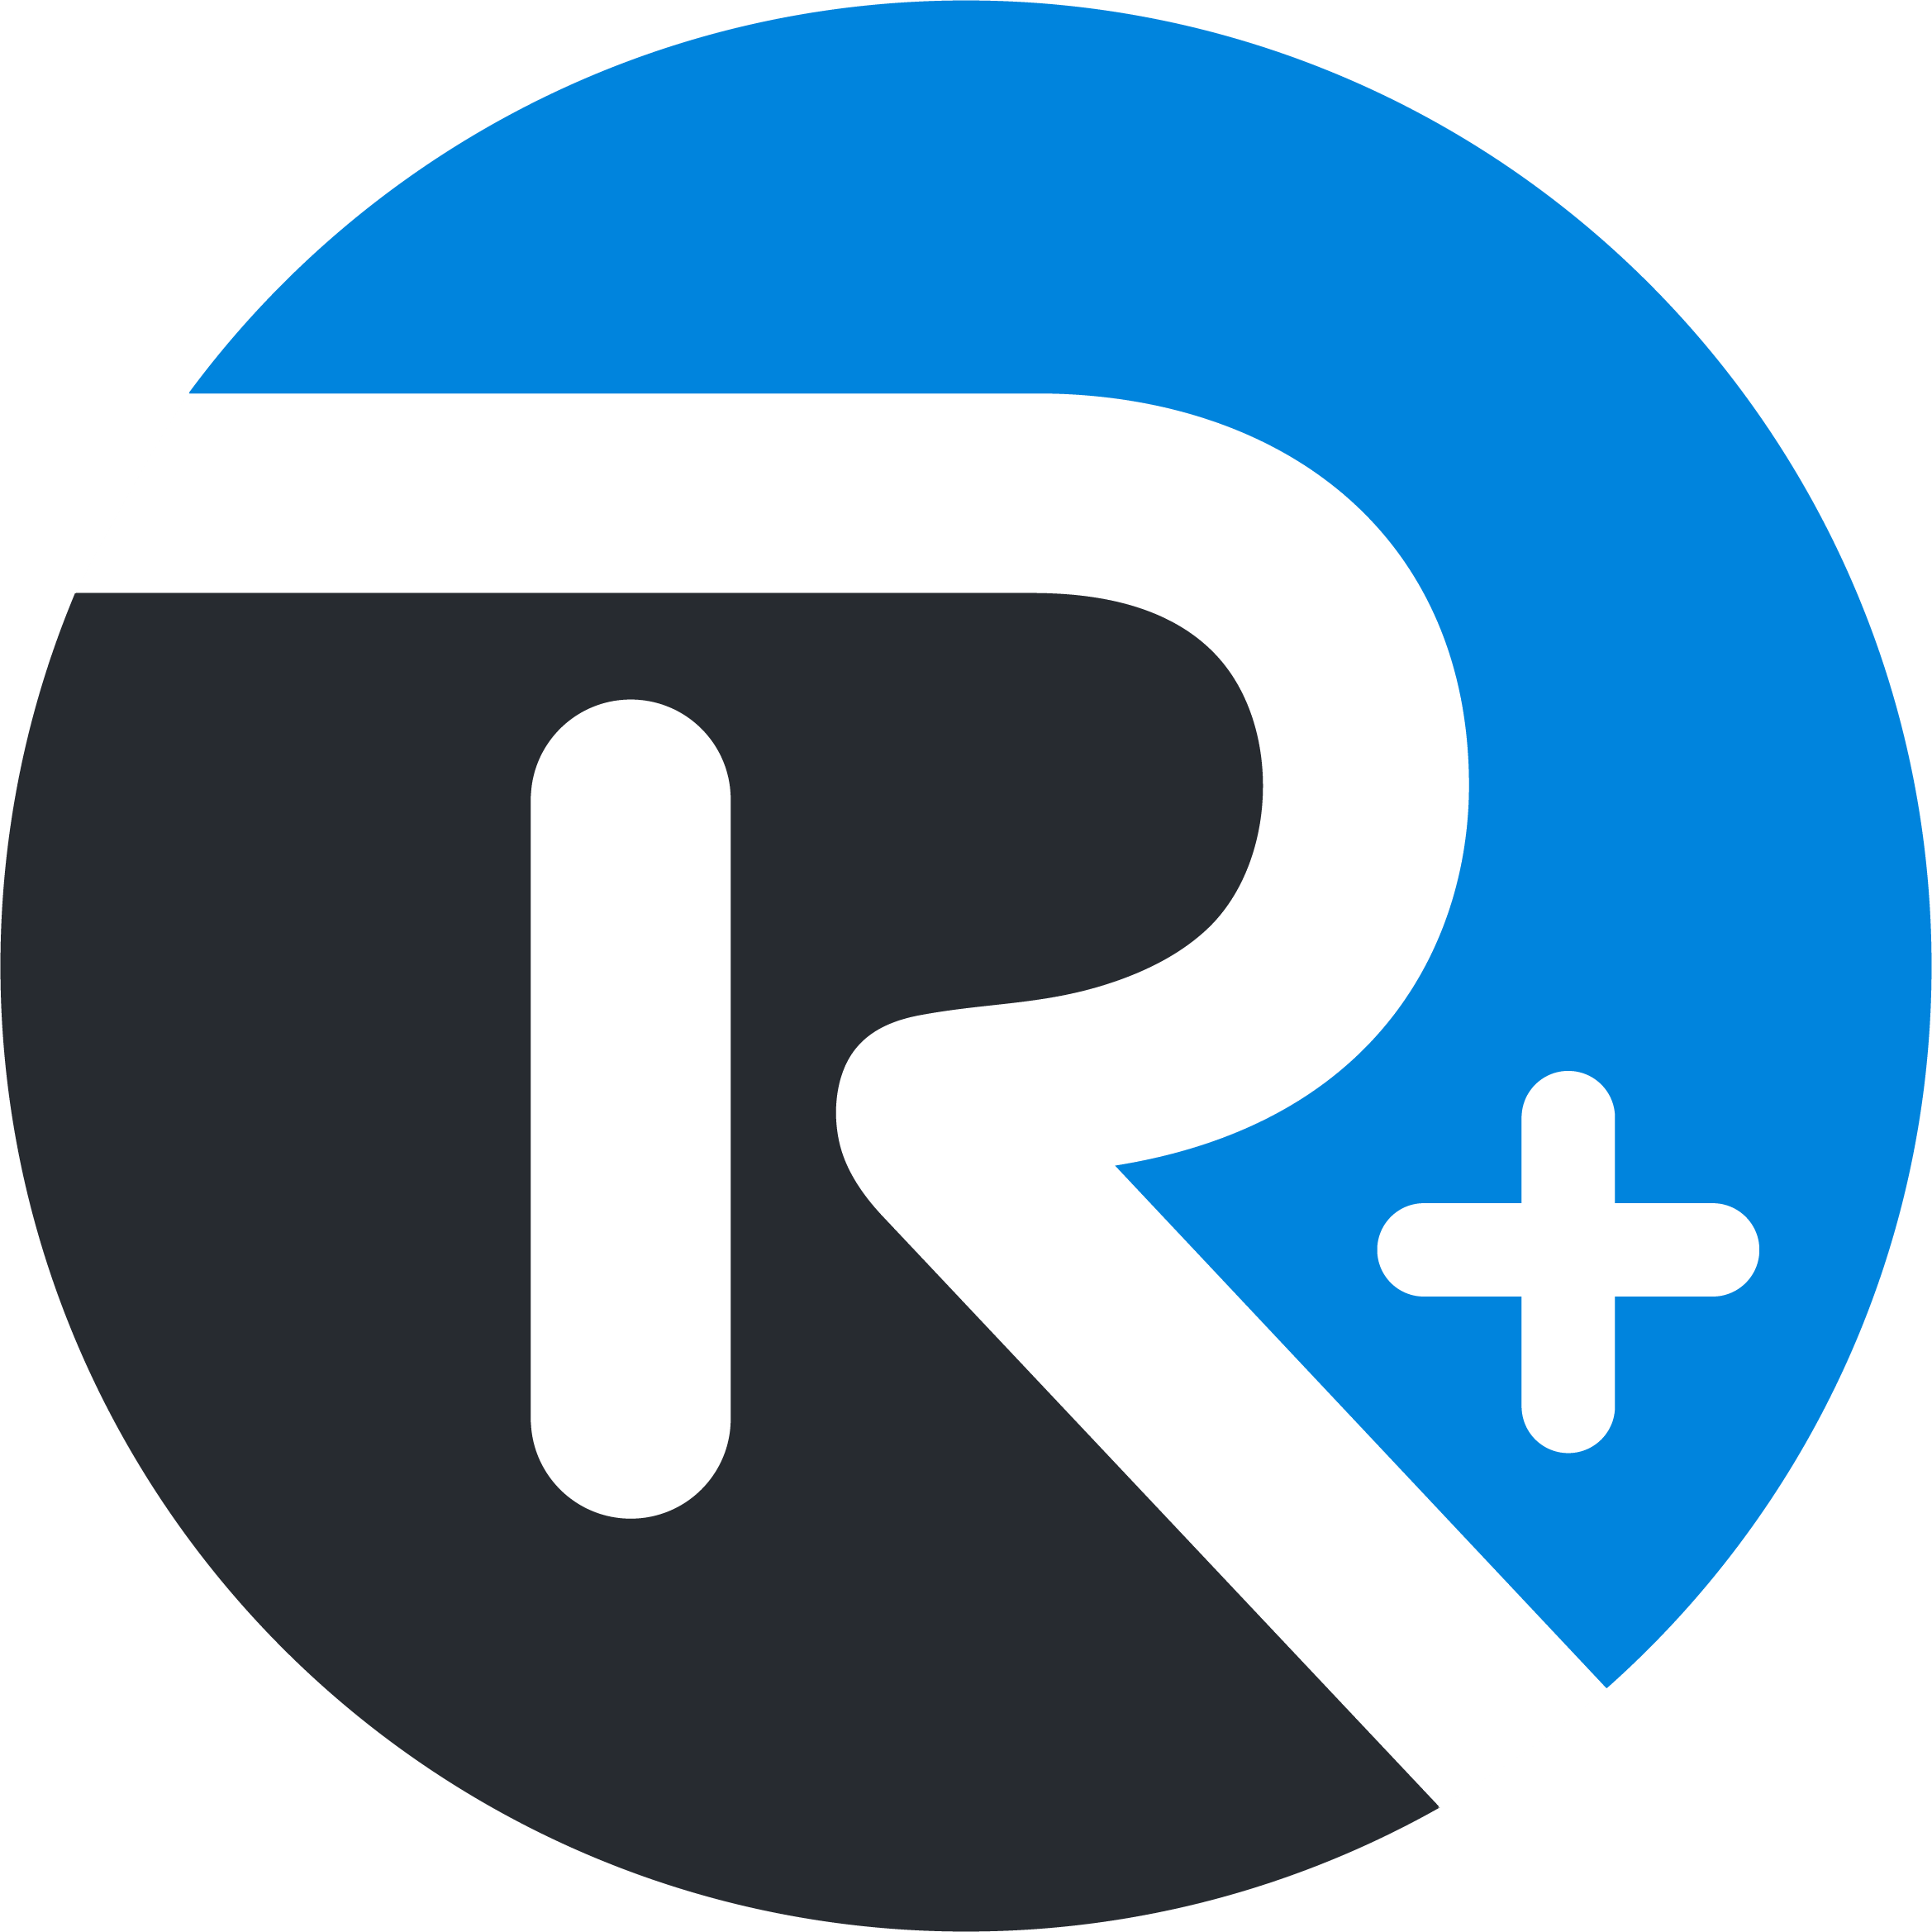 Ropro Roblox {Feb 2021} Read All About The Extension!